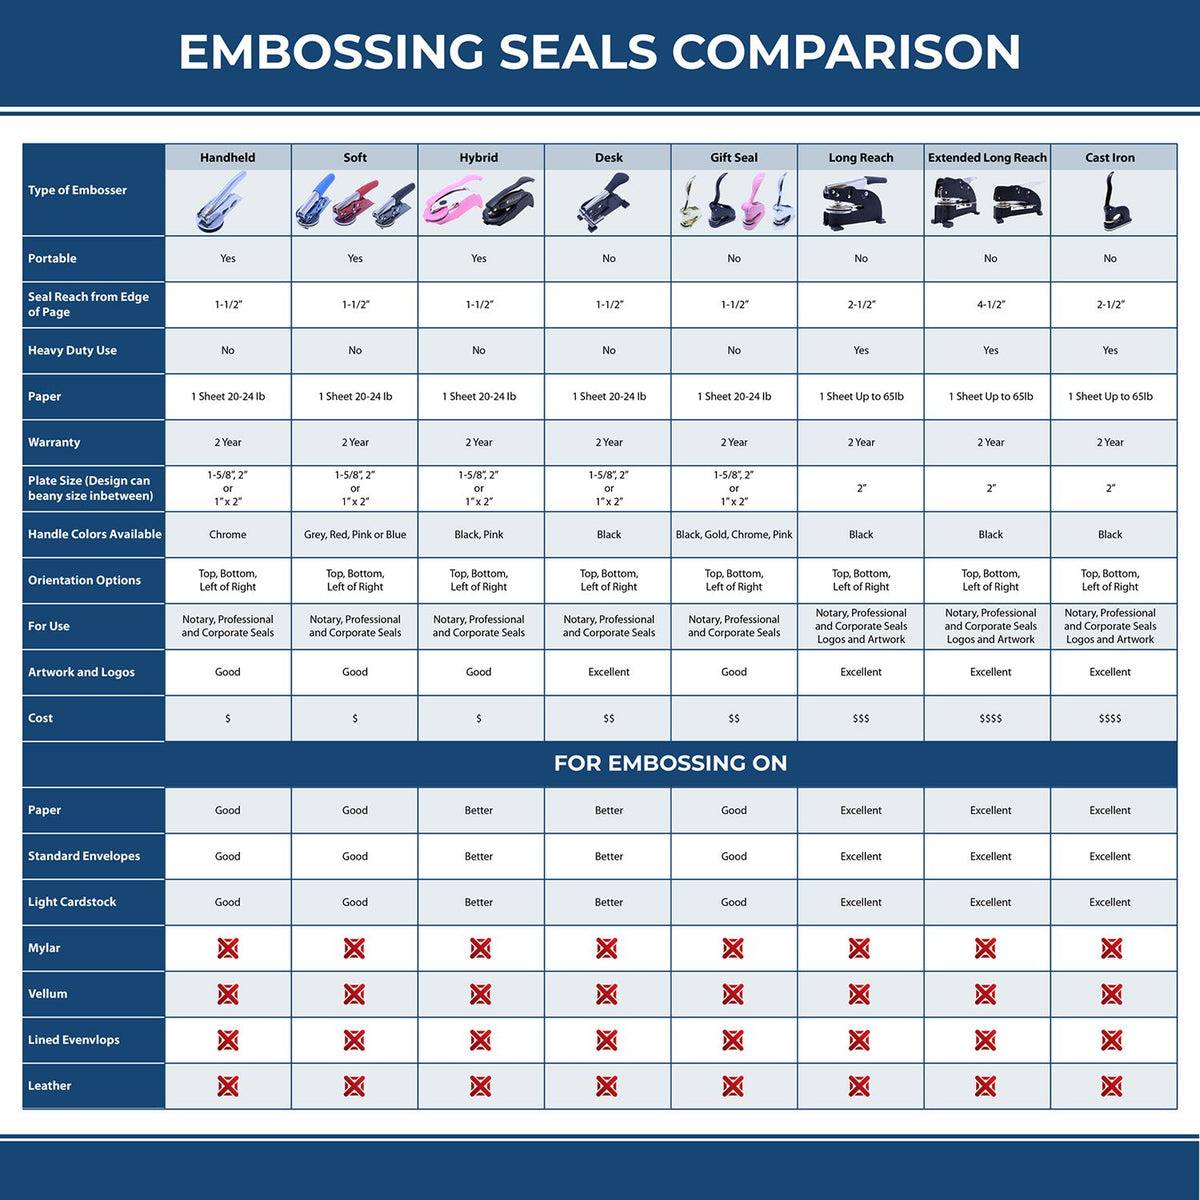 A comparison chart for the different types of mount models available for the Heavy Duty Cast Iron Oklahoma Engineer Seal Embosser.